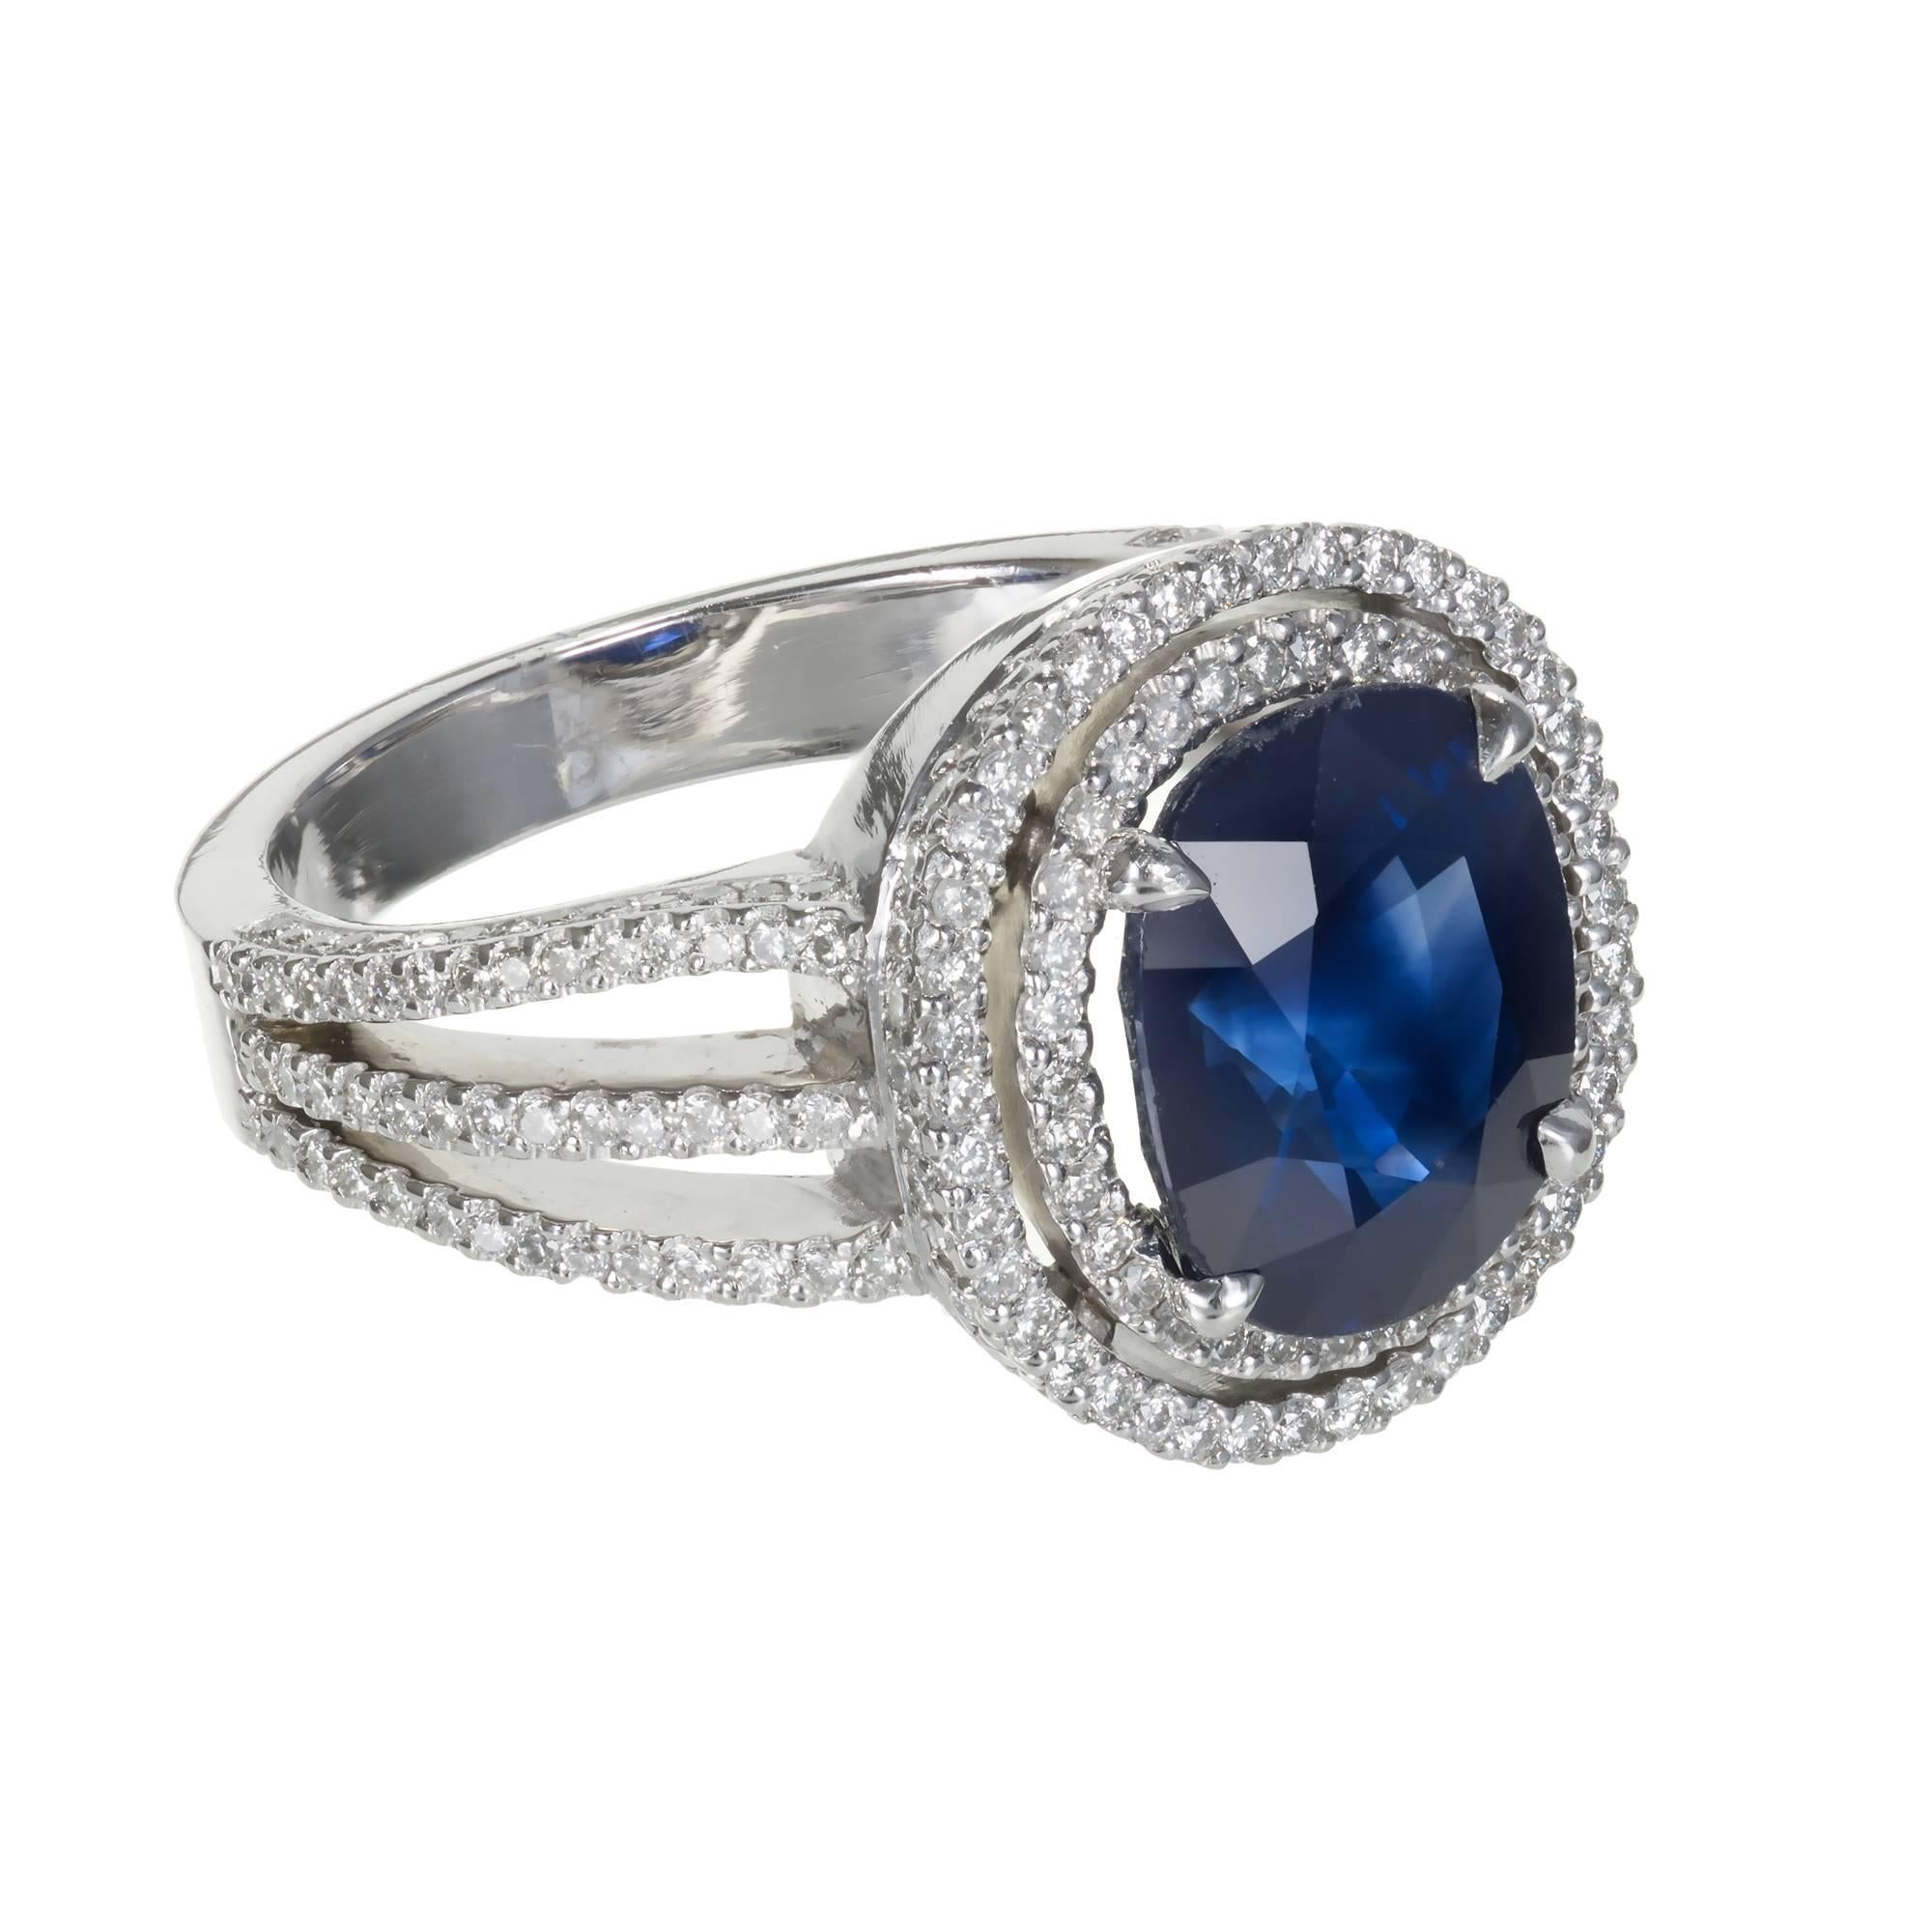 Cushion Royal blue Sapphire and diamond engagement ring.  GIA certified natural corundum simple heat only no other enhancements. Handmade Platinum ring with 160 diamonds. double halo top, triple shank. Circa 1950.

1 cushion cut gem Royal blue